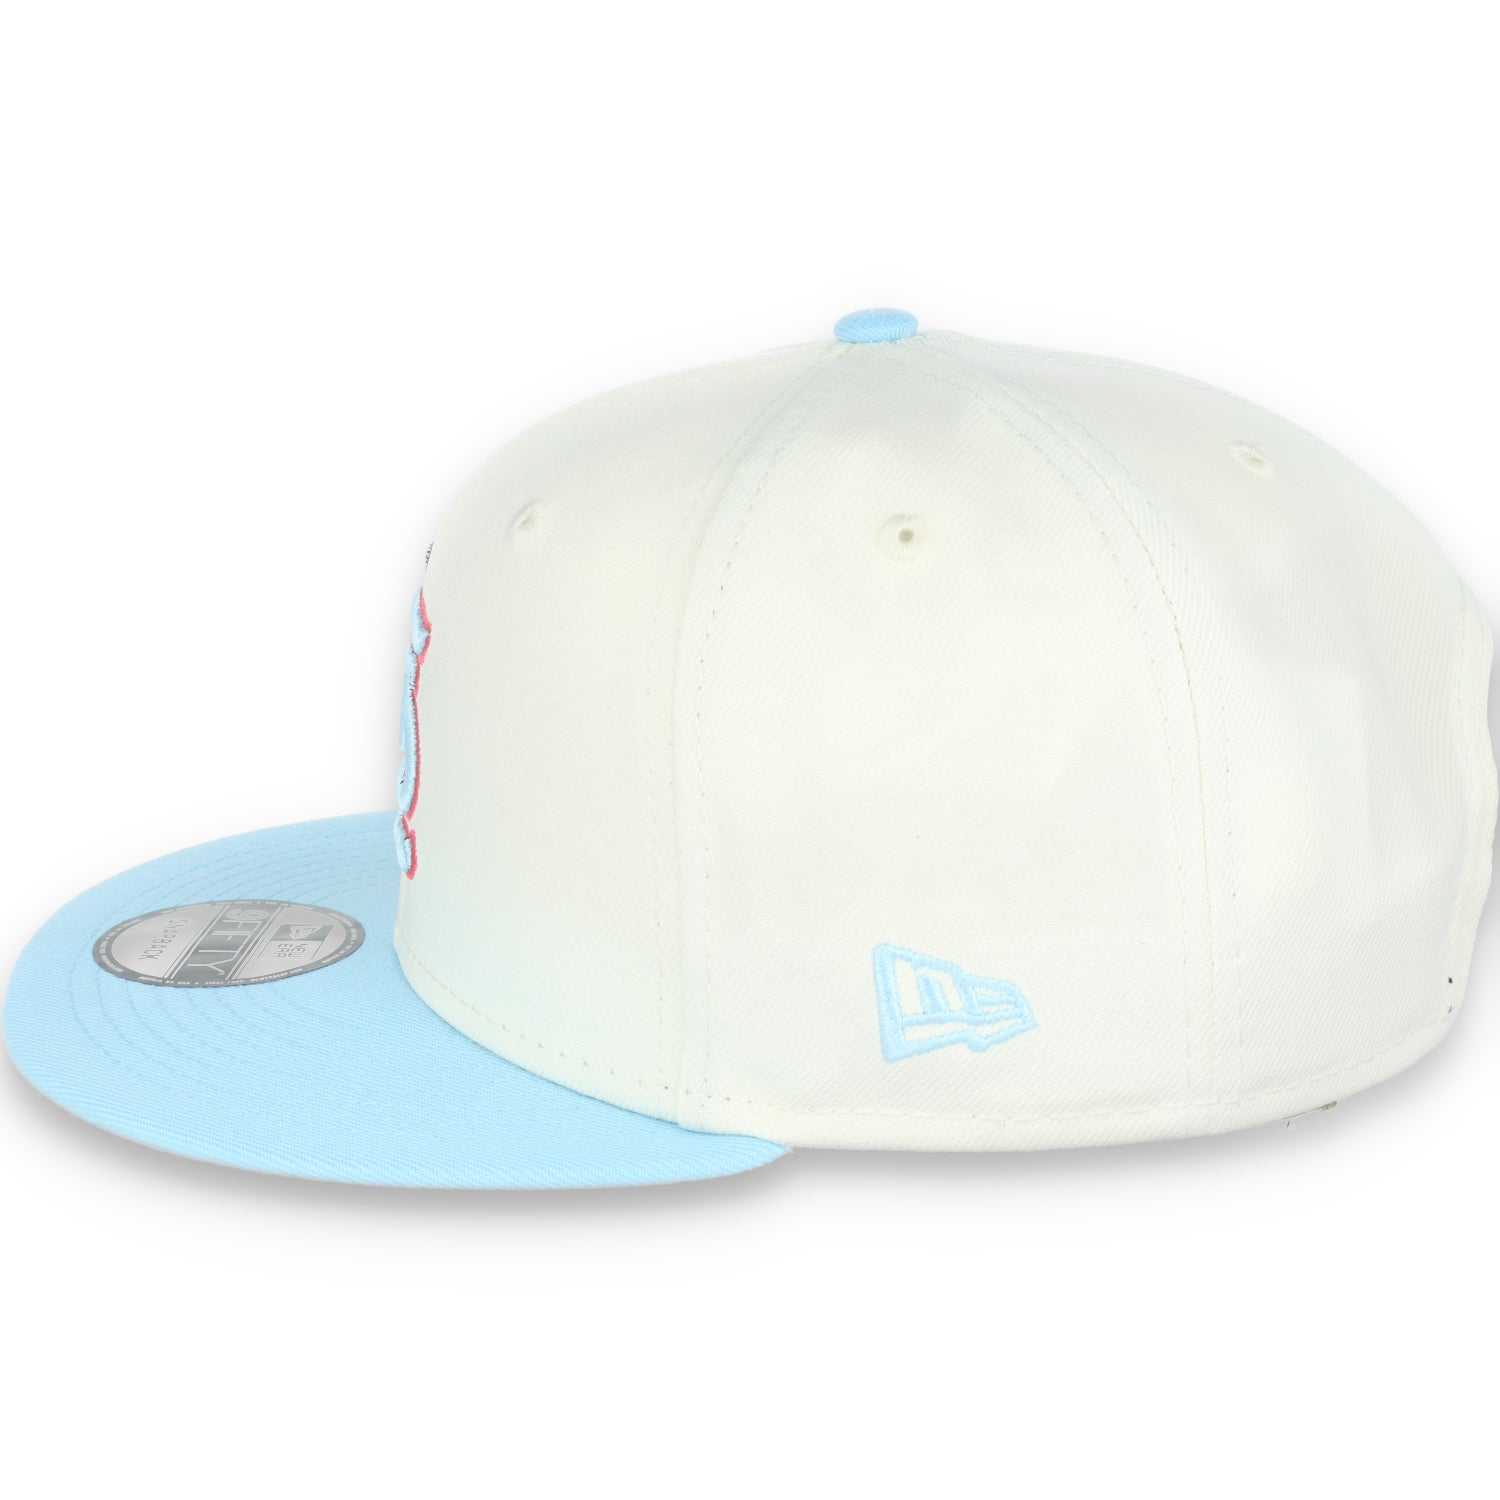 New Era St. Louis Cardinals 2-Tone Color Pack 9FIFTY Snapback Hat- Chrome/Baby Blue